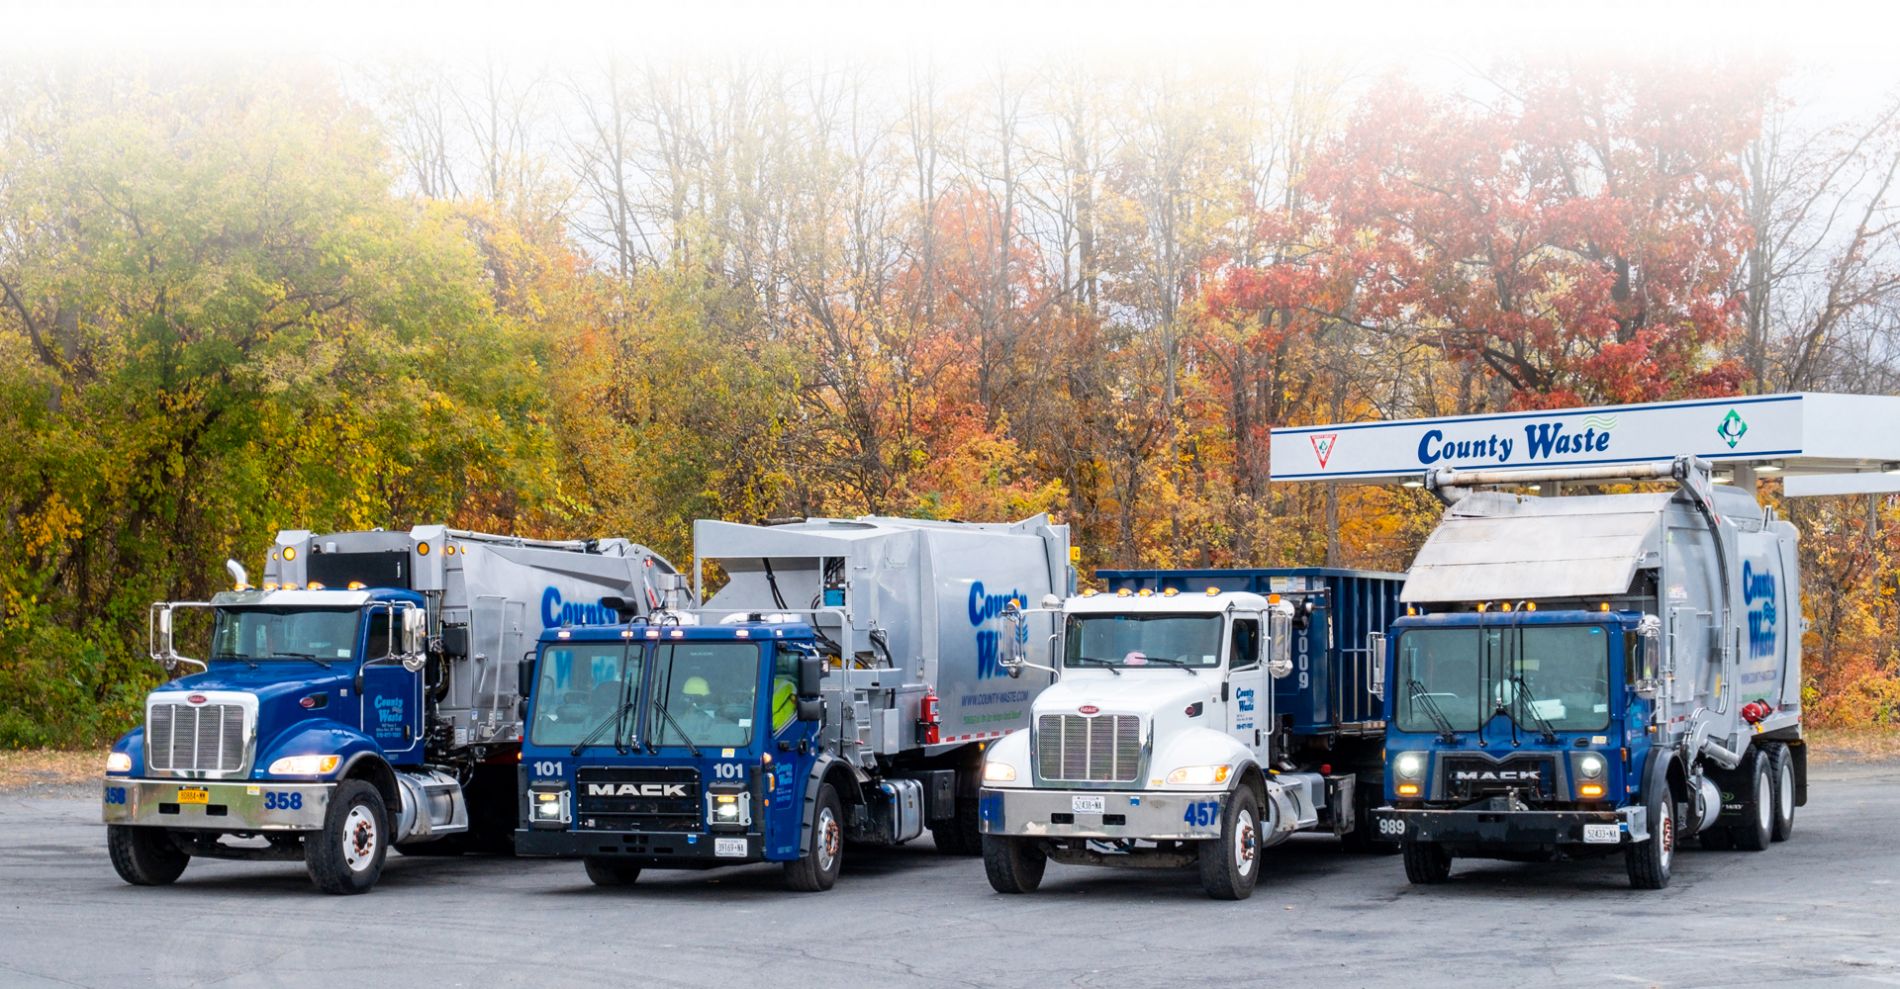 County Waste NY invests in the Capital Region environment waste management infrastructure